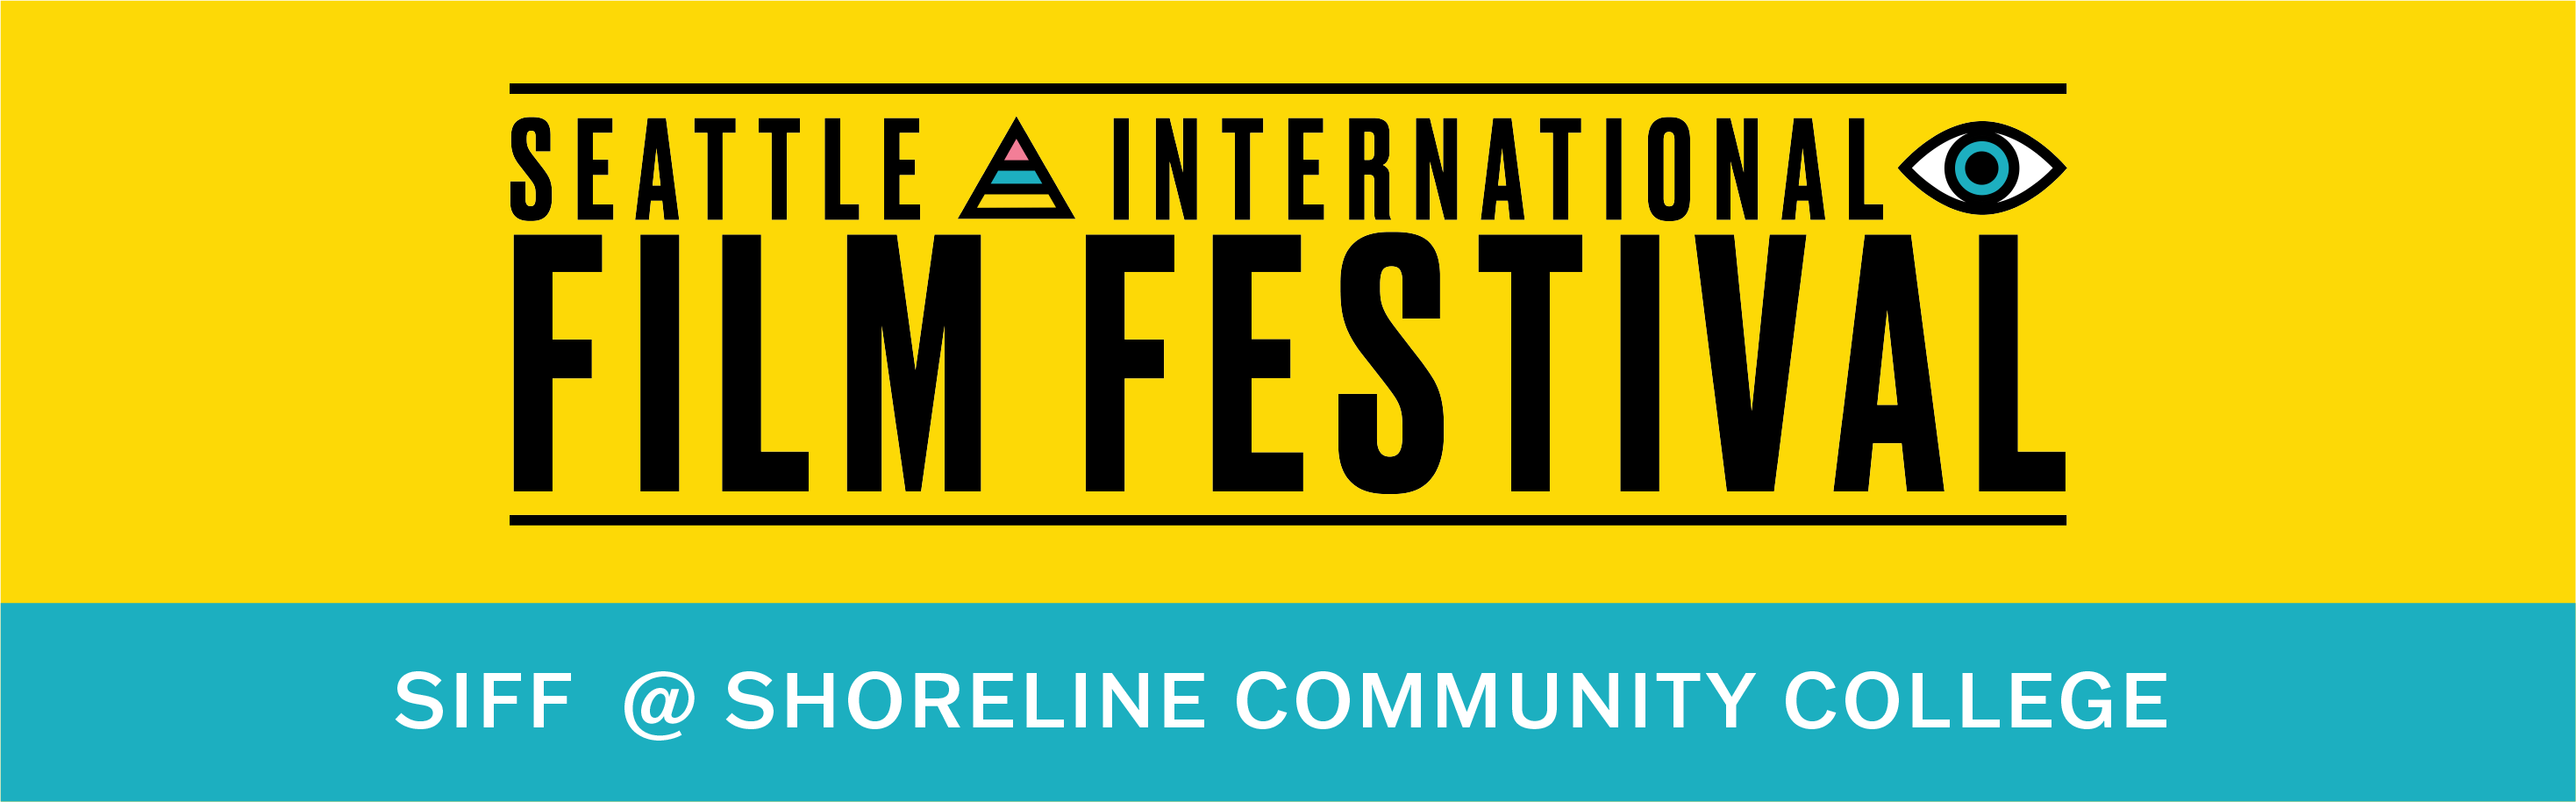 Shoreline Area News: SIFF schedule at Shoreline Community College this week